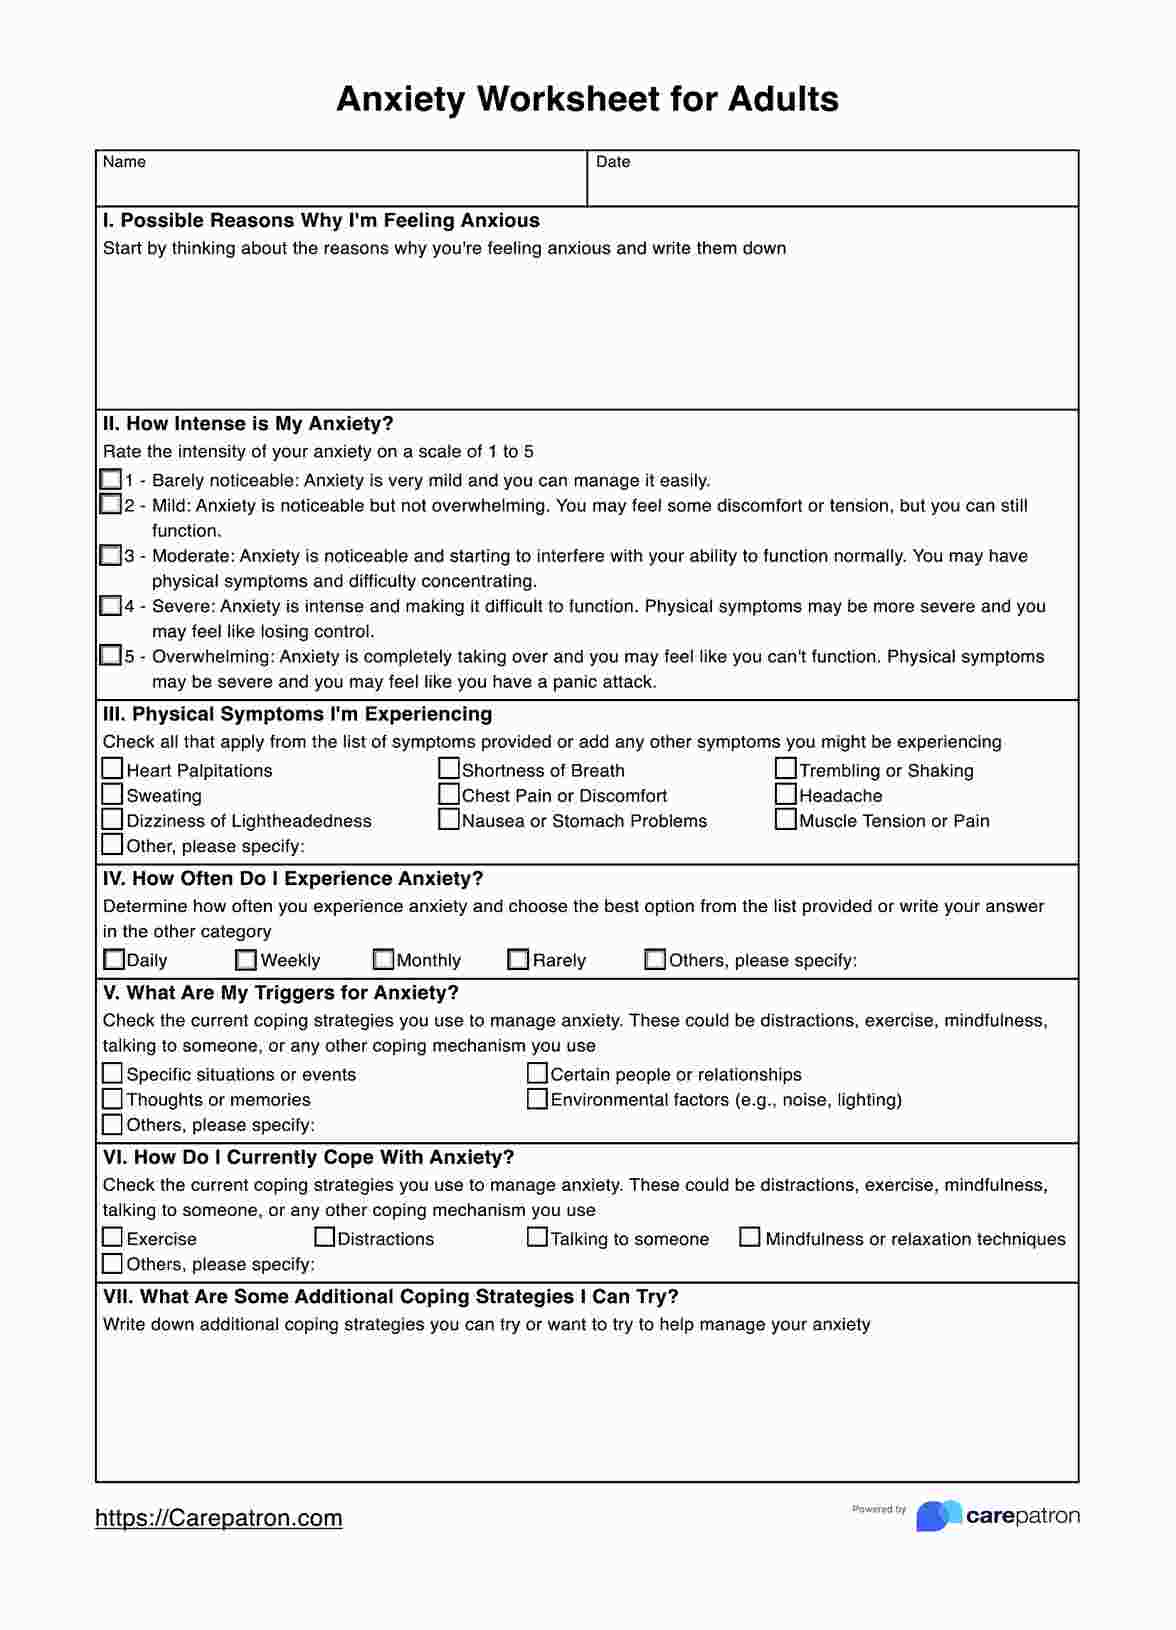 Anxiety Worksheets For Adults PDF Example